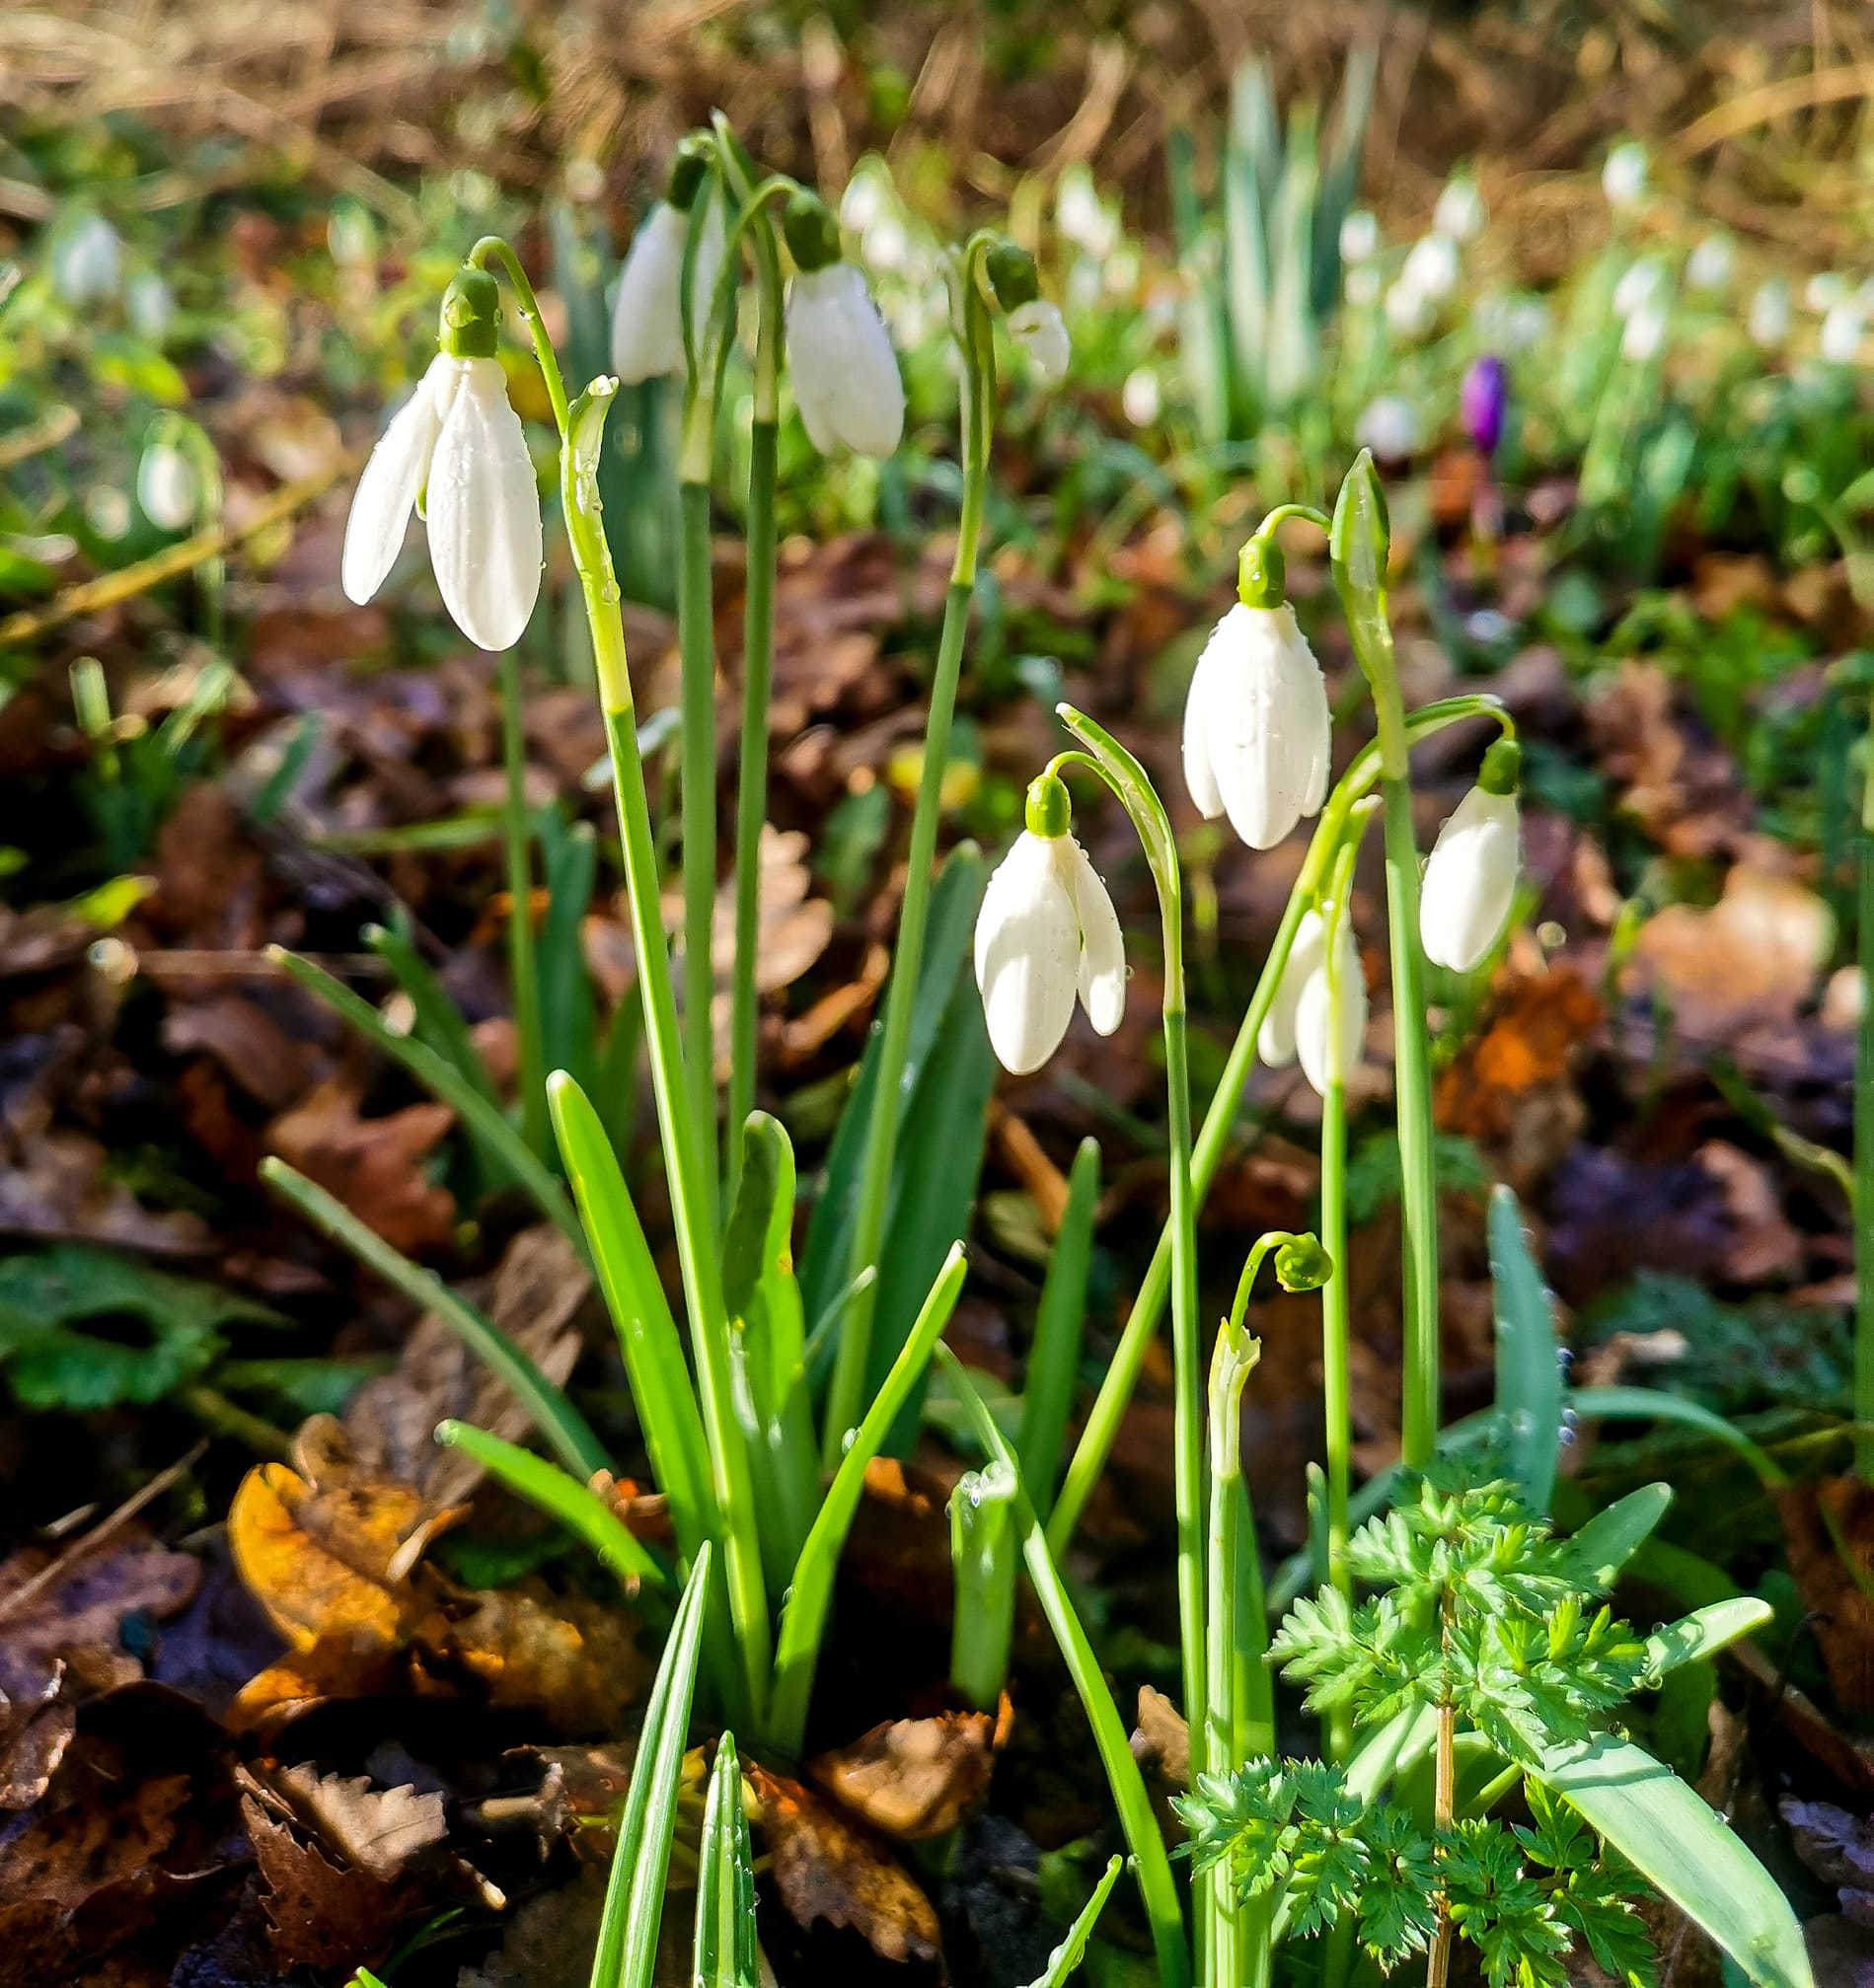 Snowdrops at Shakerley Mere by Ann Marie Taylor